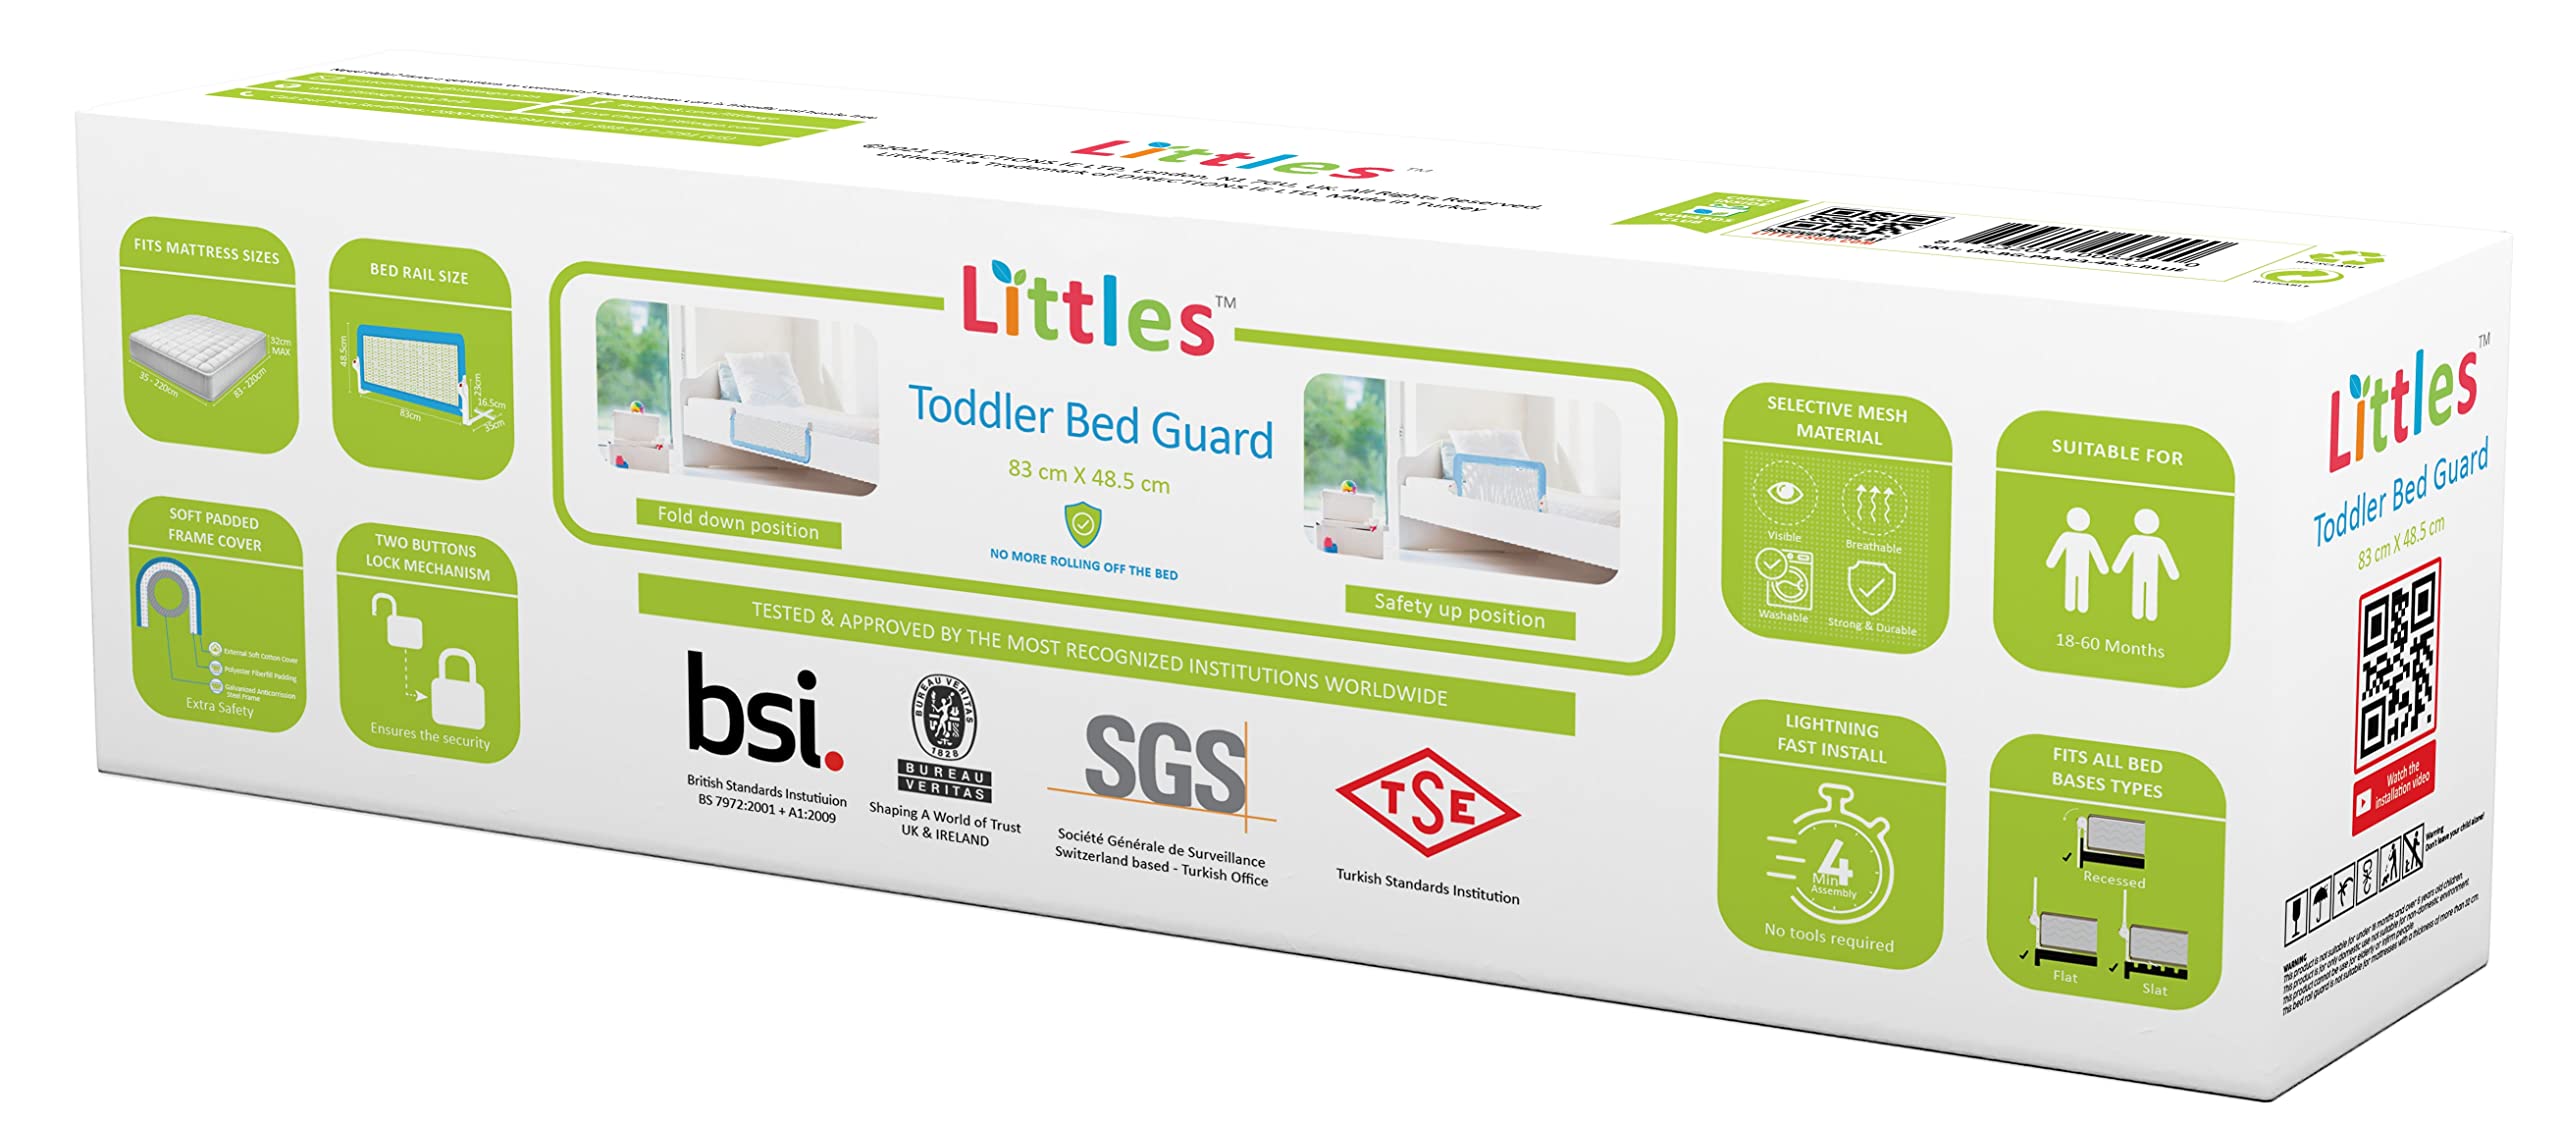 Littles Bed Guard Rail for Toddler, Child & Baby. Fits Single, Double Up to King Size Beds, Grey, 83 cm x 48.5 cm